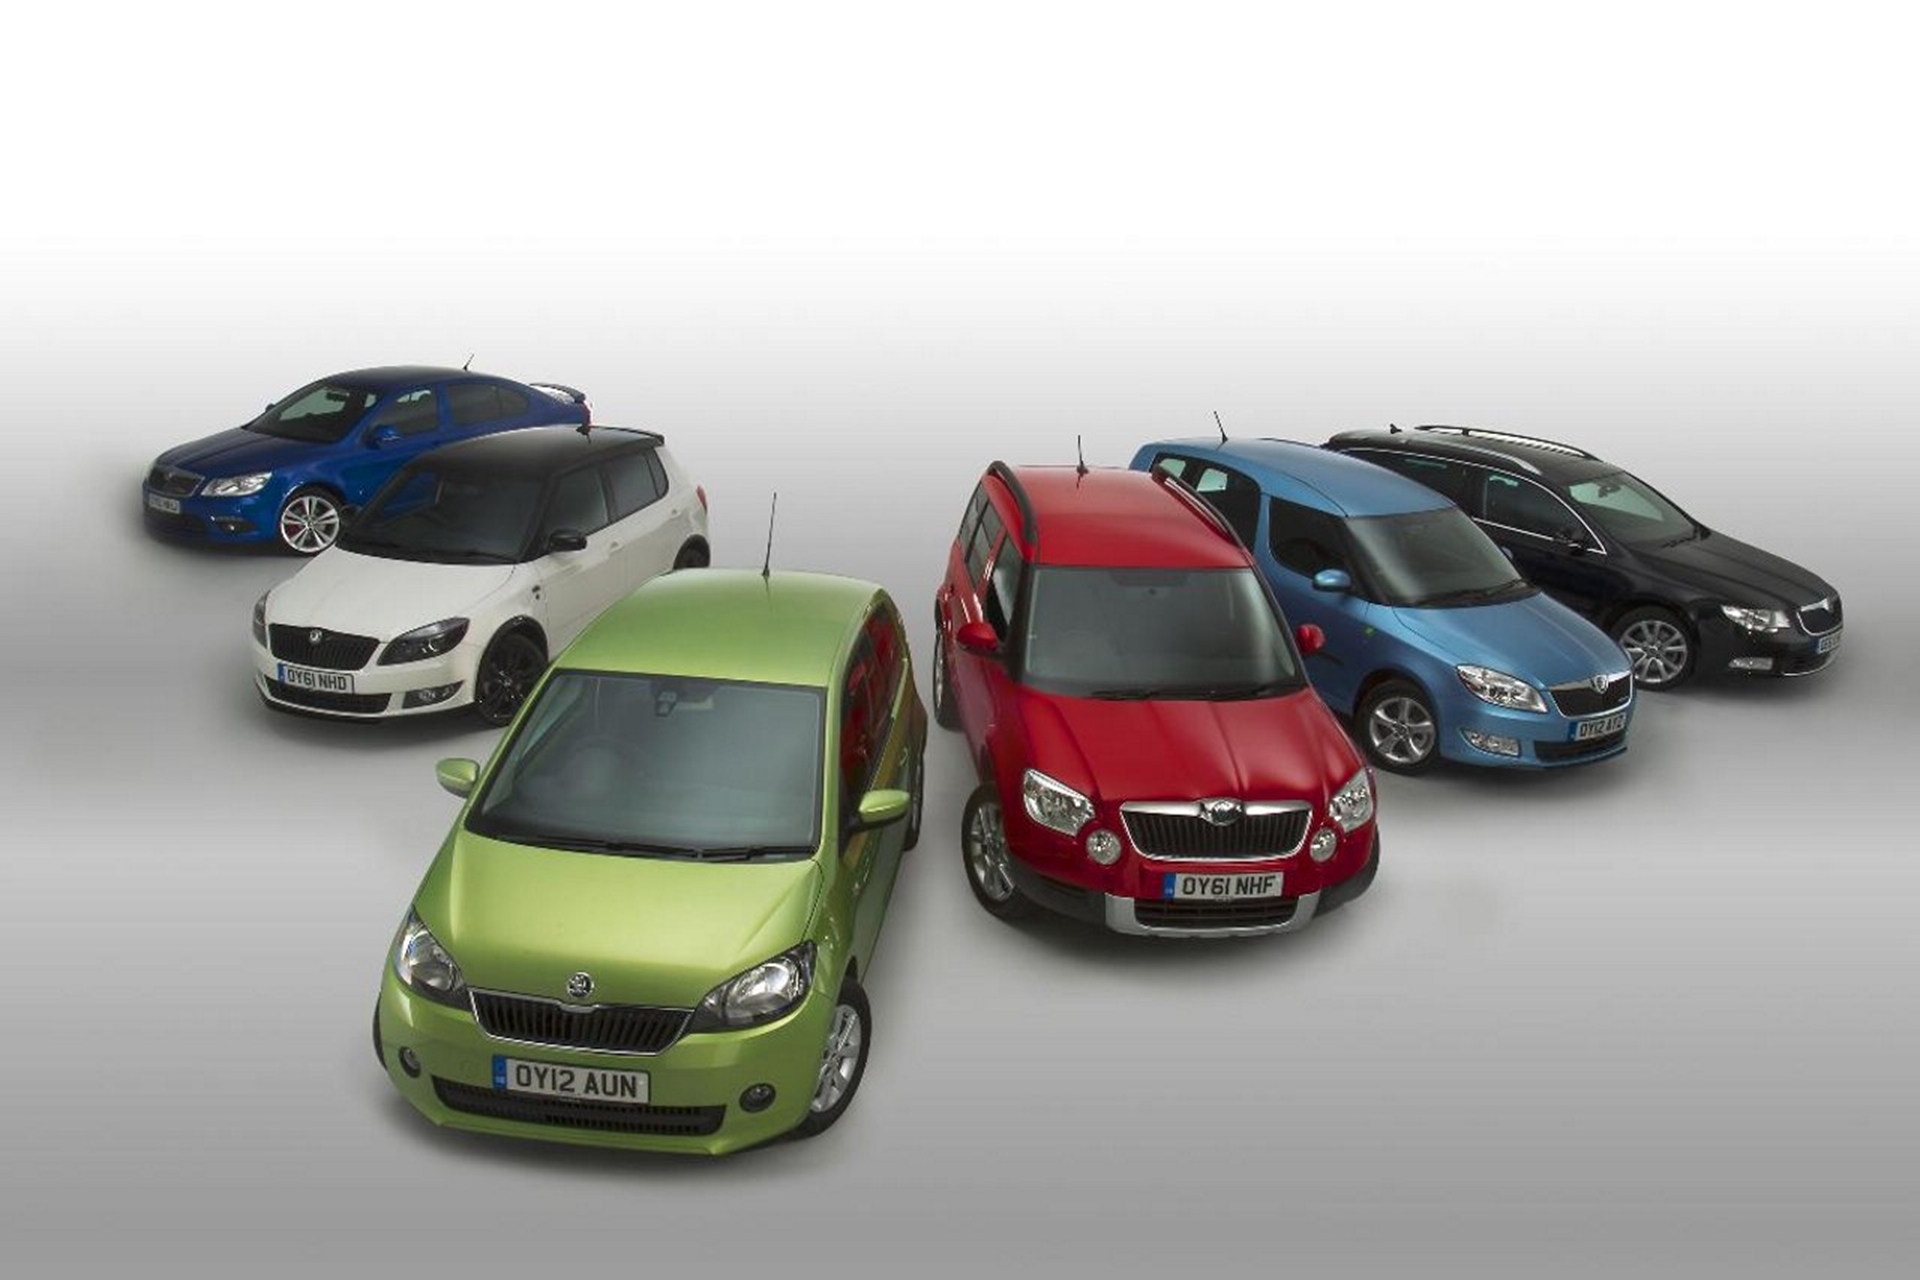 ŠKODA AUTO POSTS RECORD DELIVERIES IN FIRST HALF OF 2012